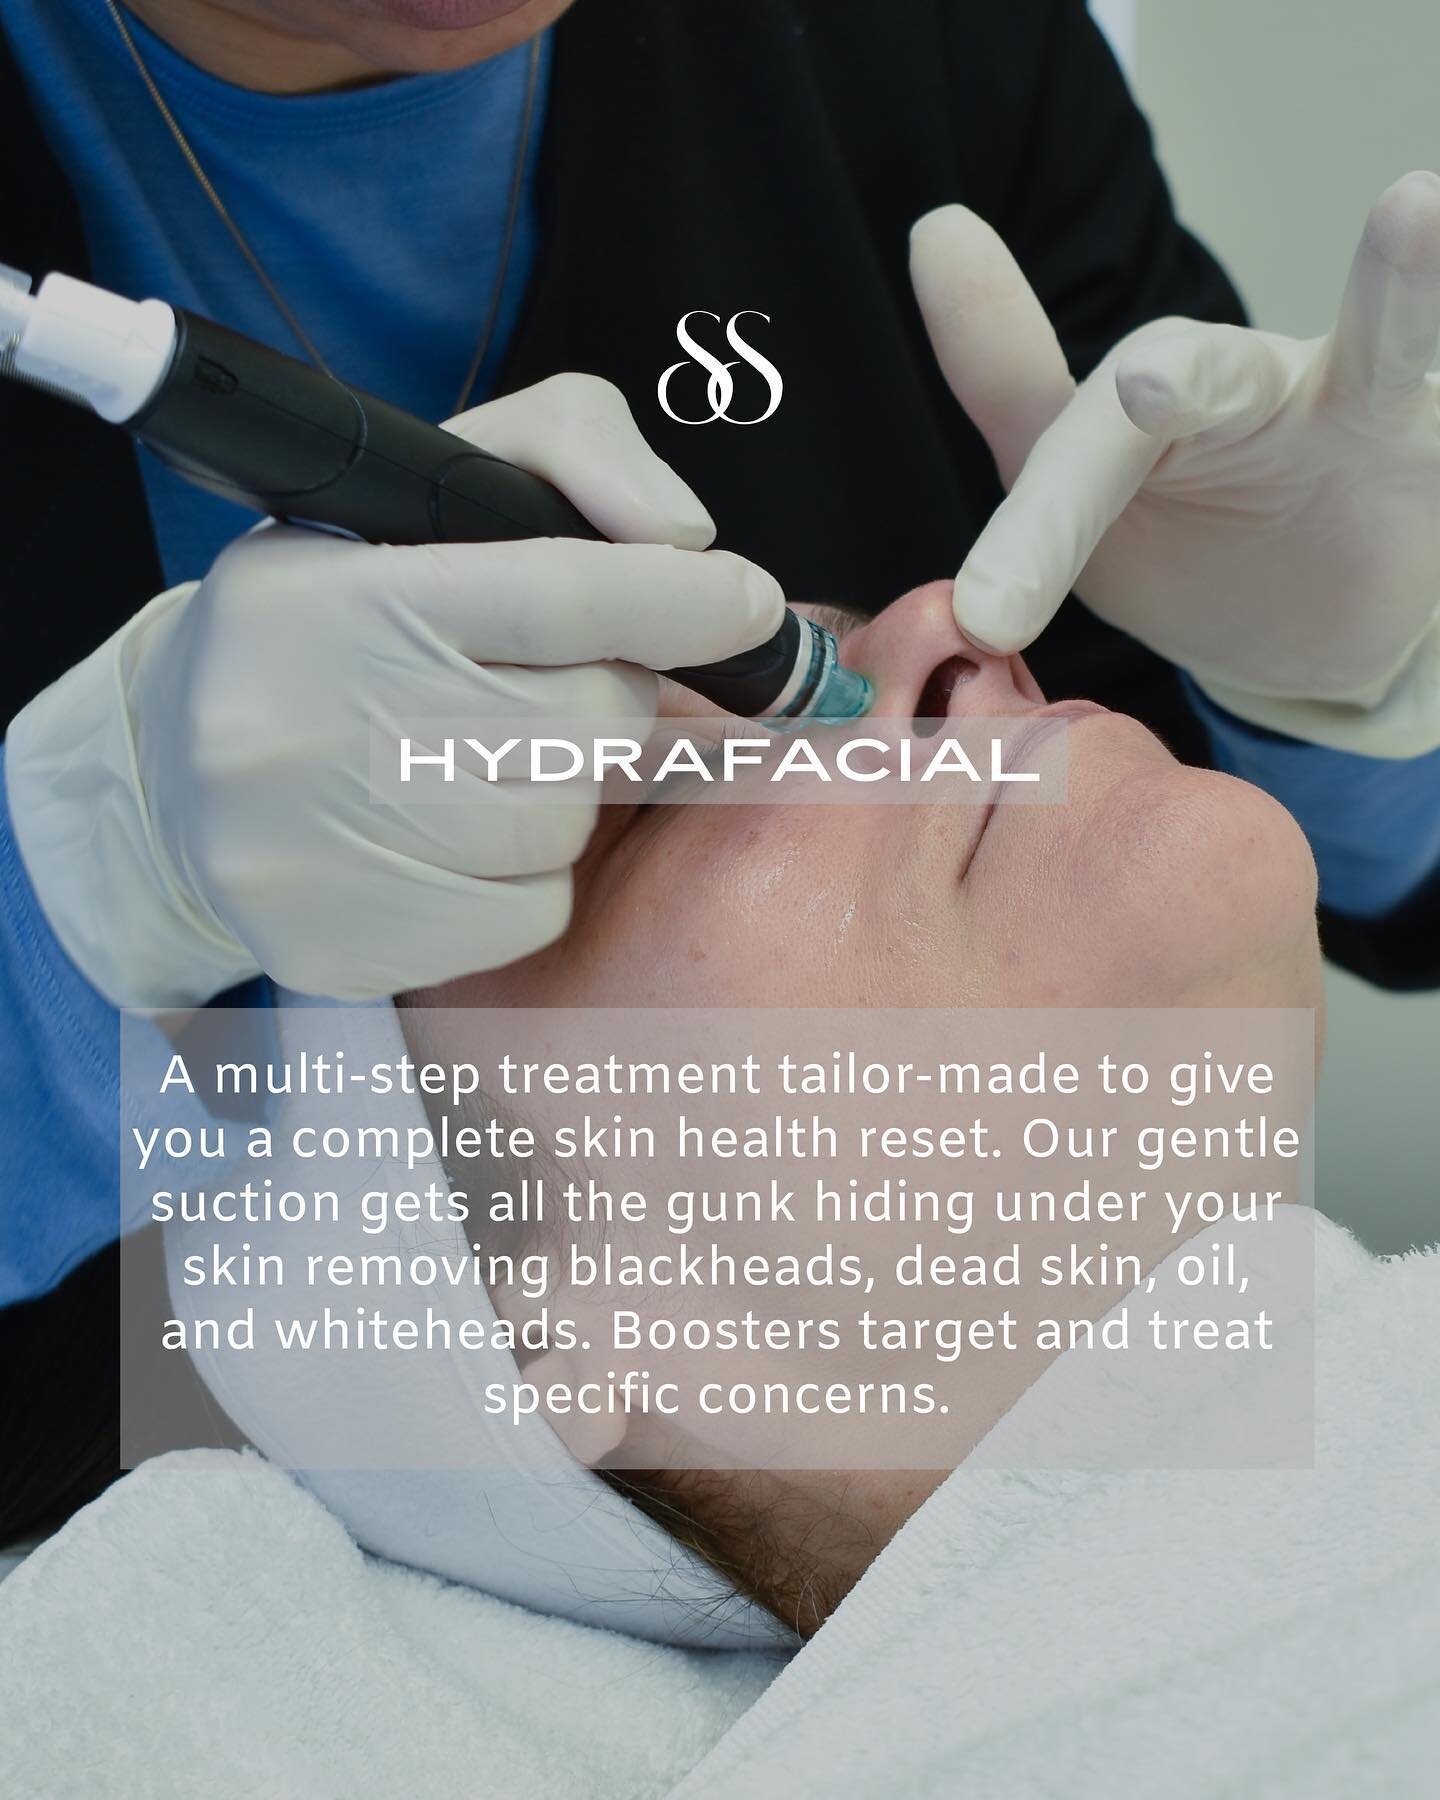 Swipe for the facts about HydraFacial ✨

This non-invasive facial treatment is made for all skin types and is a major game changer for dull, congested skin. 

Book your HydraFacial at Skin Suite Winnipeg today! 

📱Link in Bio to Book 
📧 info@skinsu